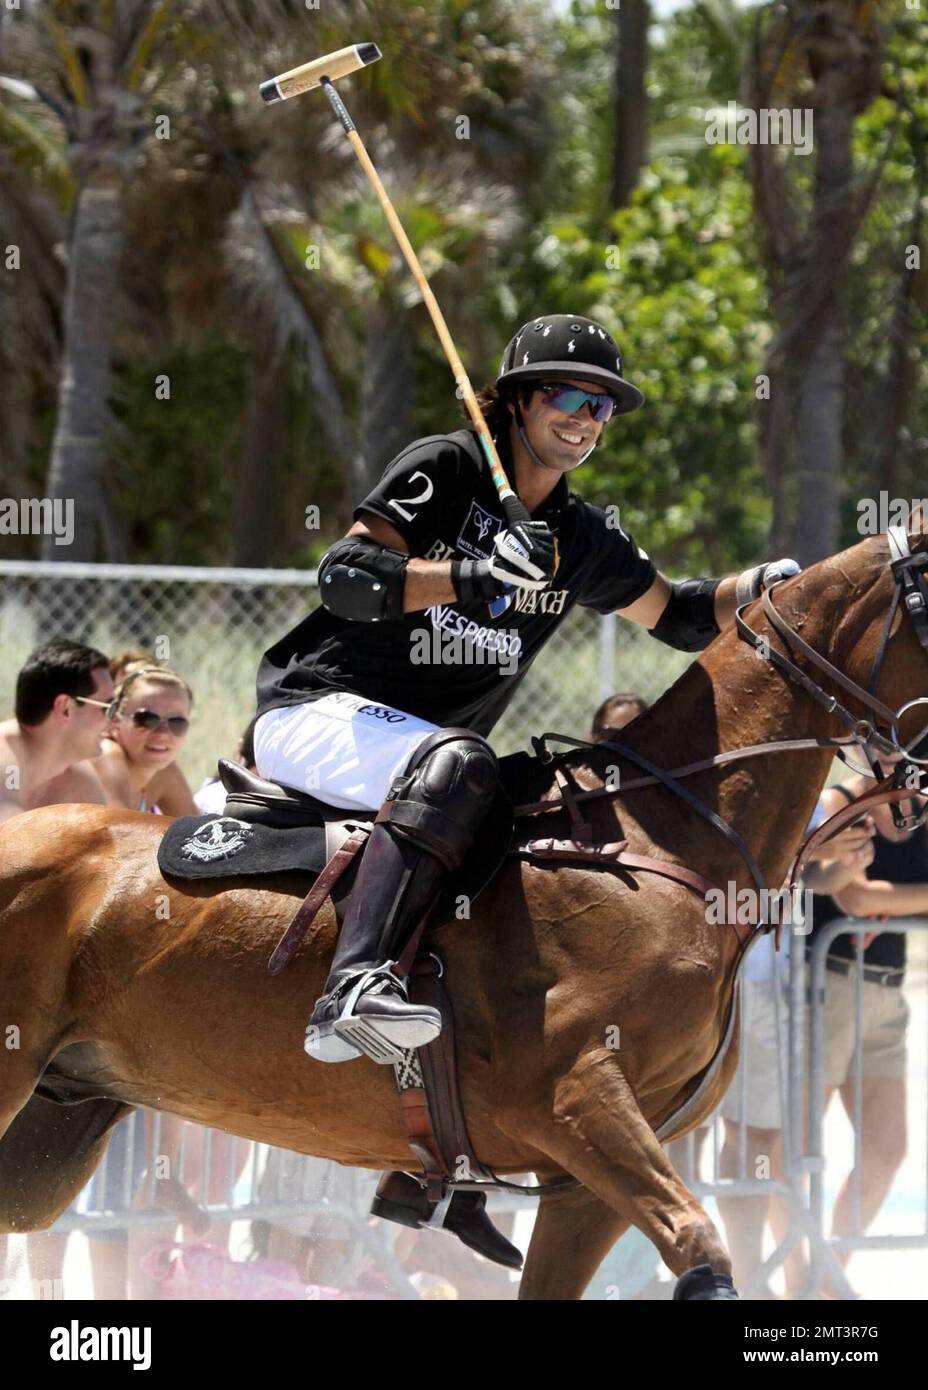 Nacho Figueras, Ralph Lauren model and member of the BlackWatch polo team,  is joined by his wife, Delfina Blaquier, while participating at the 2009  Miami Beach Polo World Cup in Miami Beach,